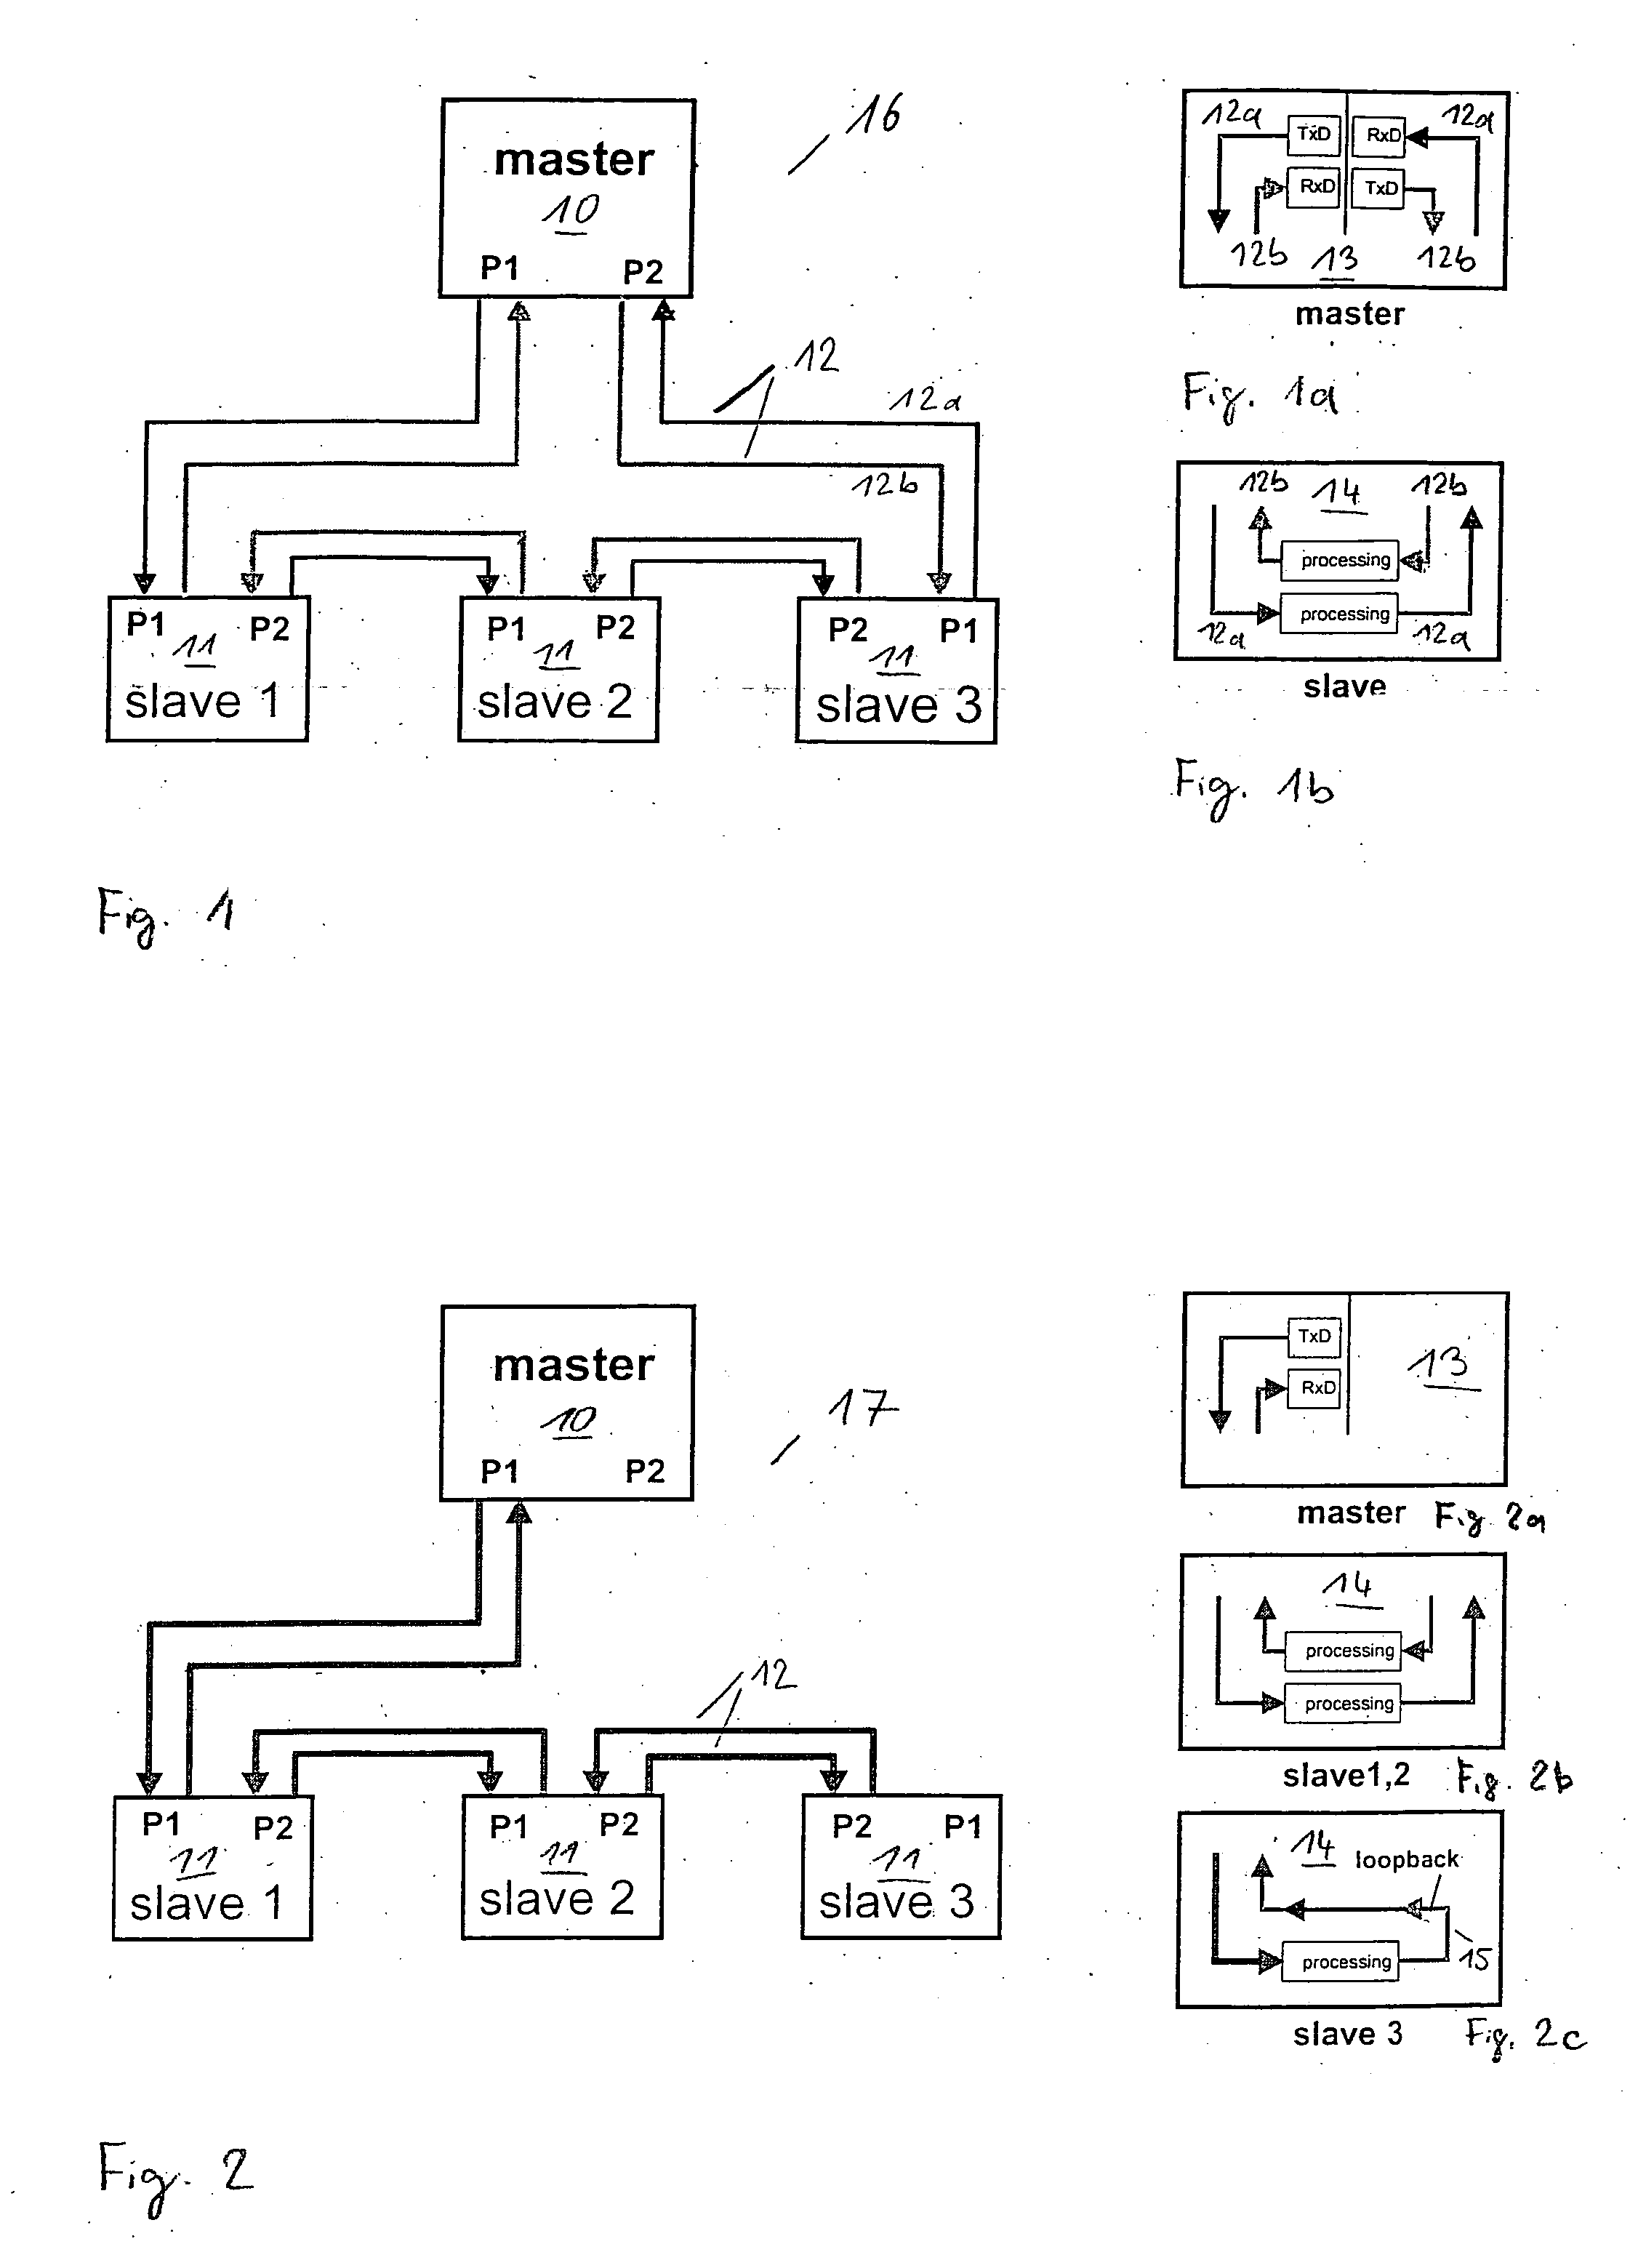 Method and device for operating a network